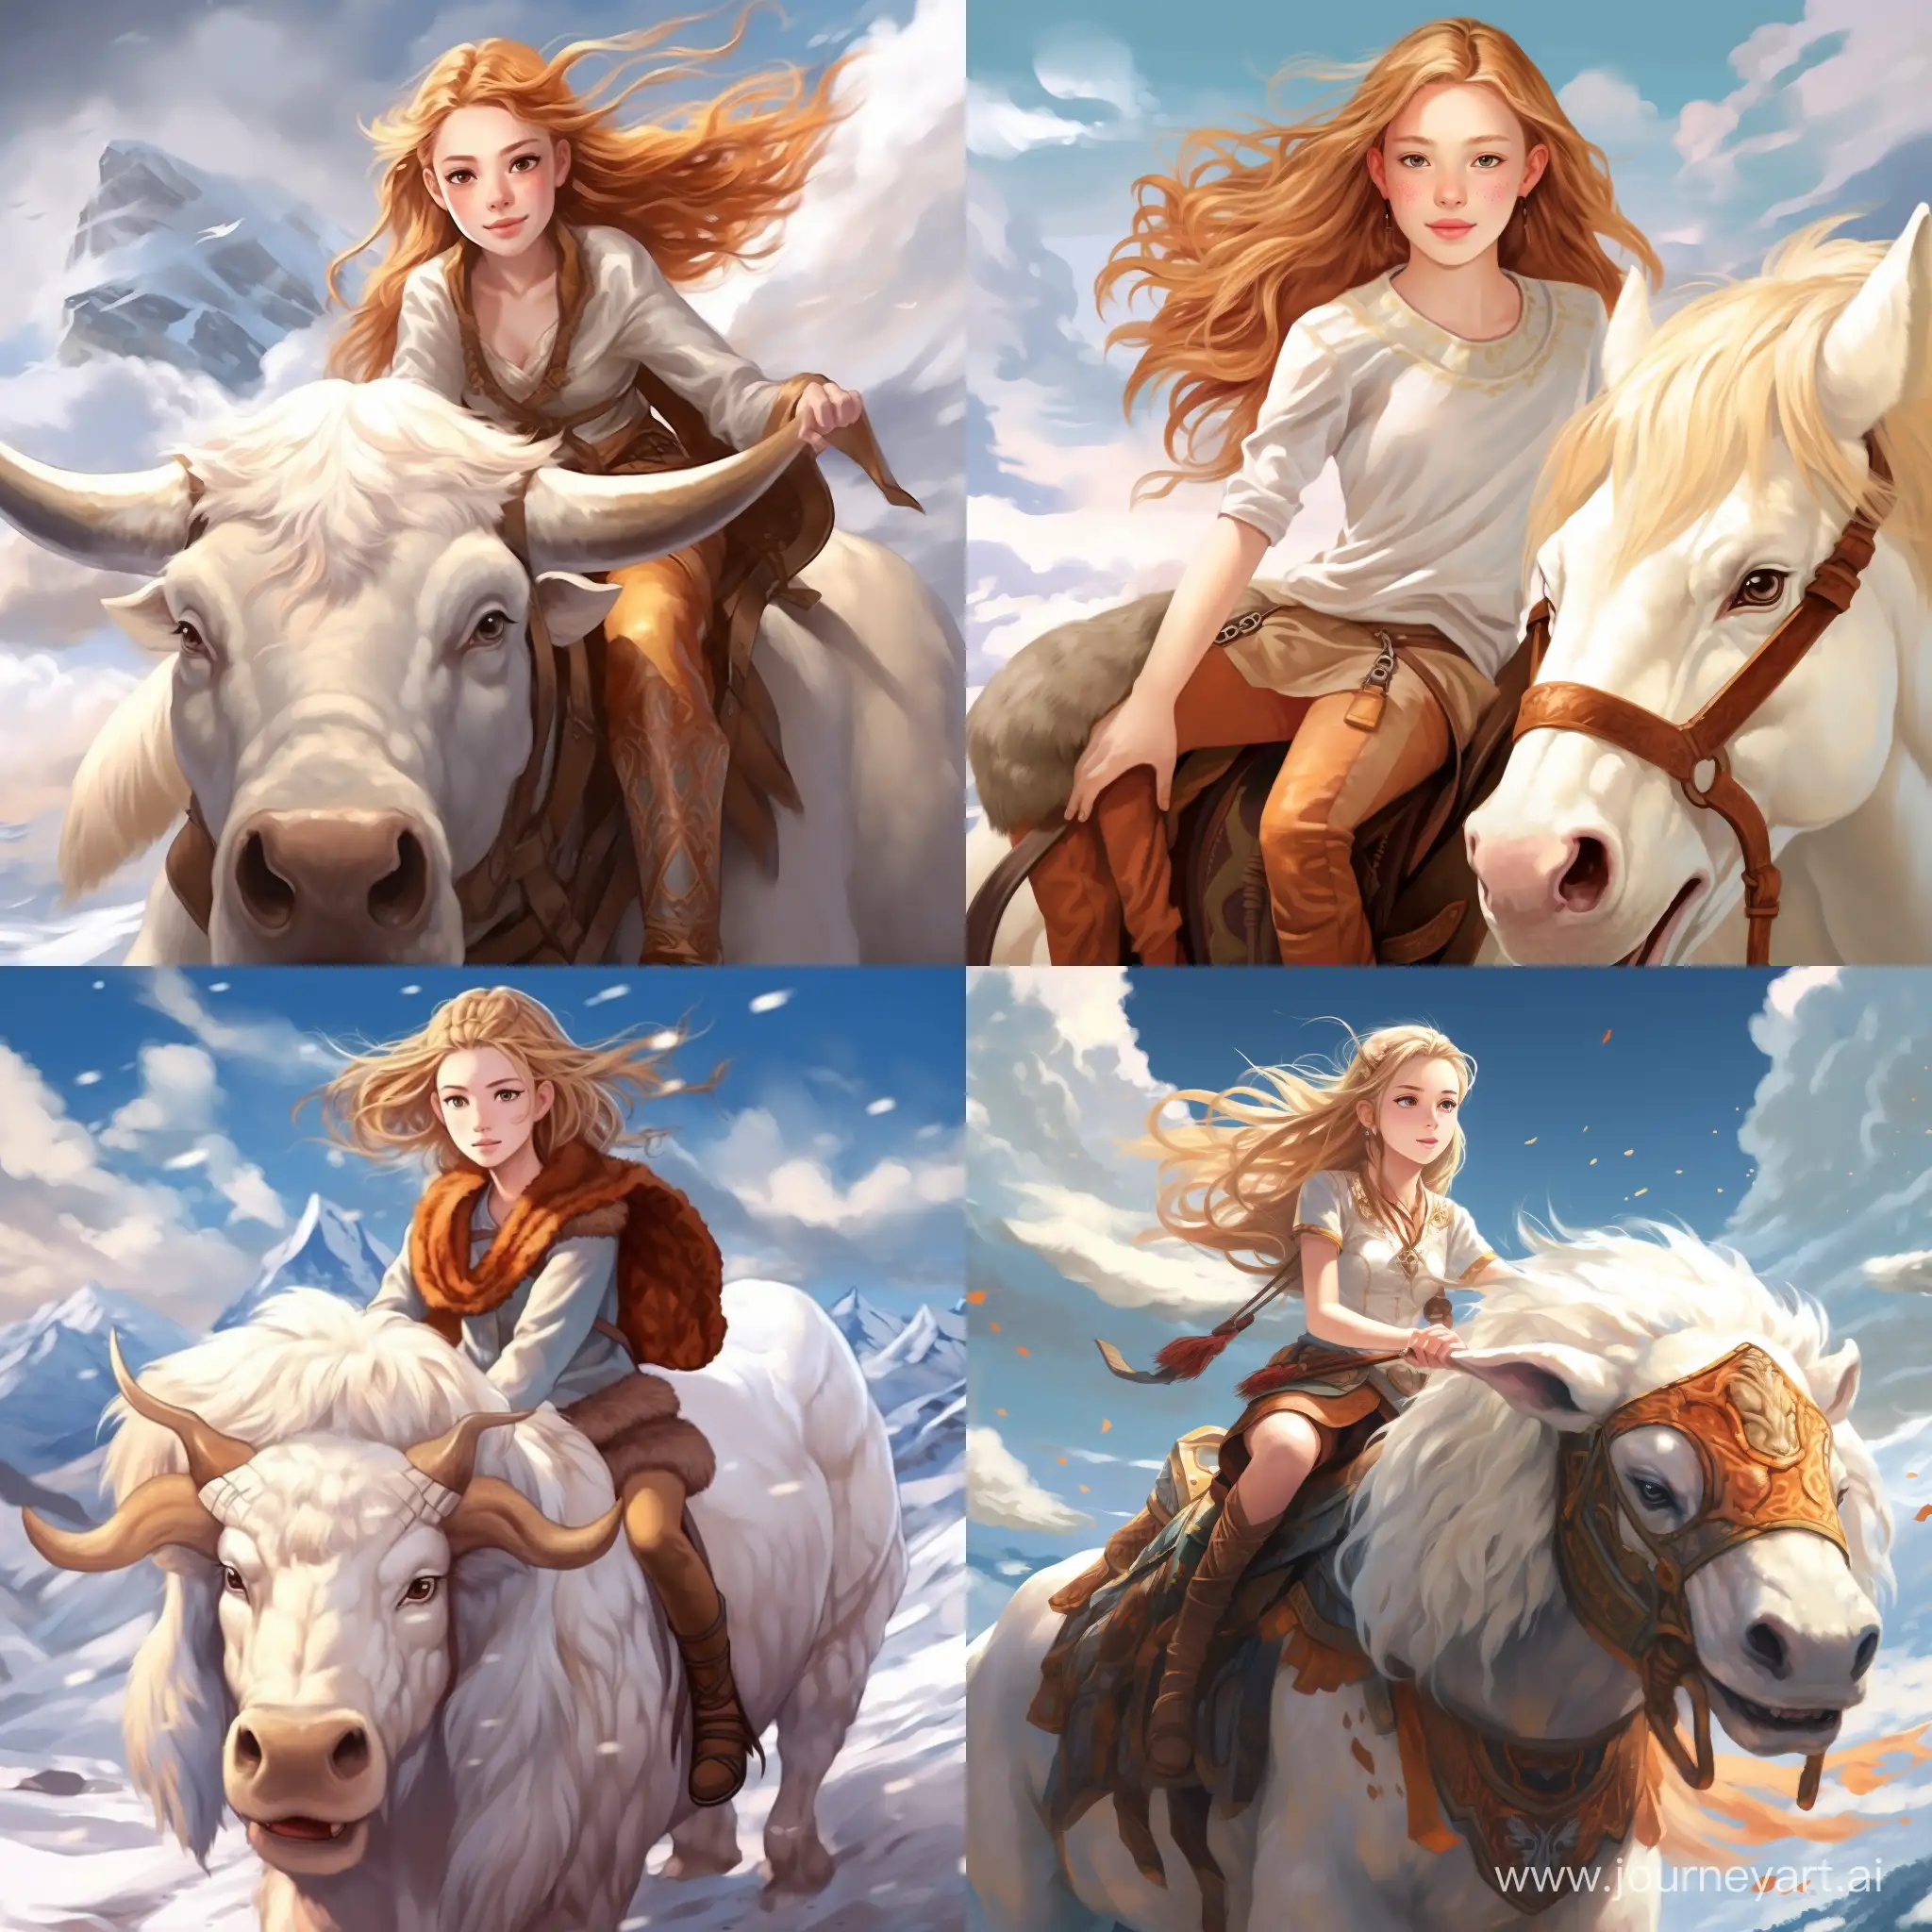 Beautiful girl, golden hair, gray-blue eyes, snow-white skin, teenager, 14 years old, in the style of avatar the legend of aang, full-length, riding a flying bison Appa, a bison the size of a house, in the sky, clouds, high quality, high detail, cartoon art